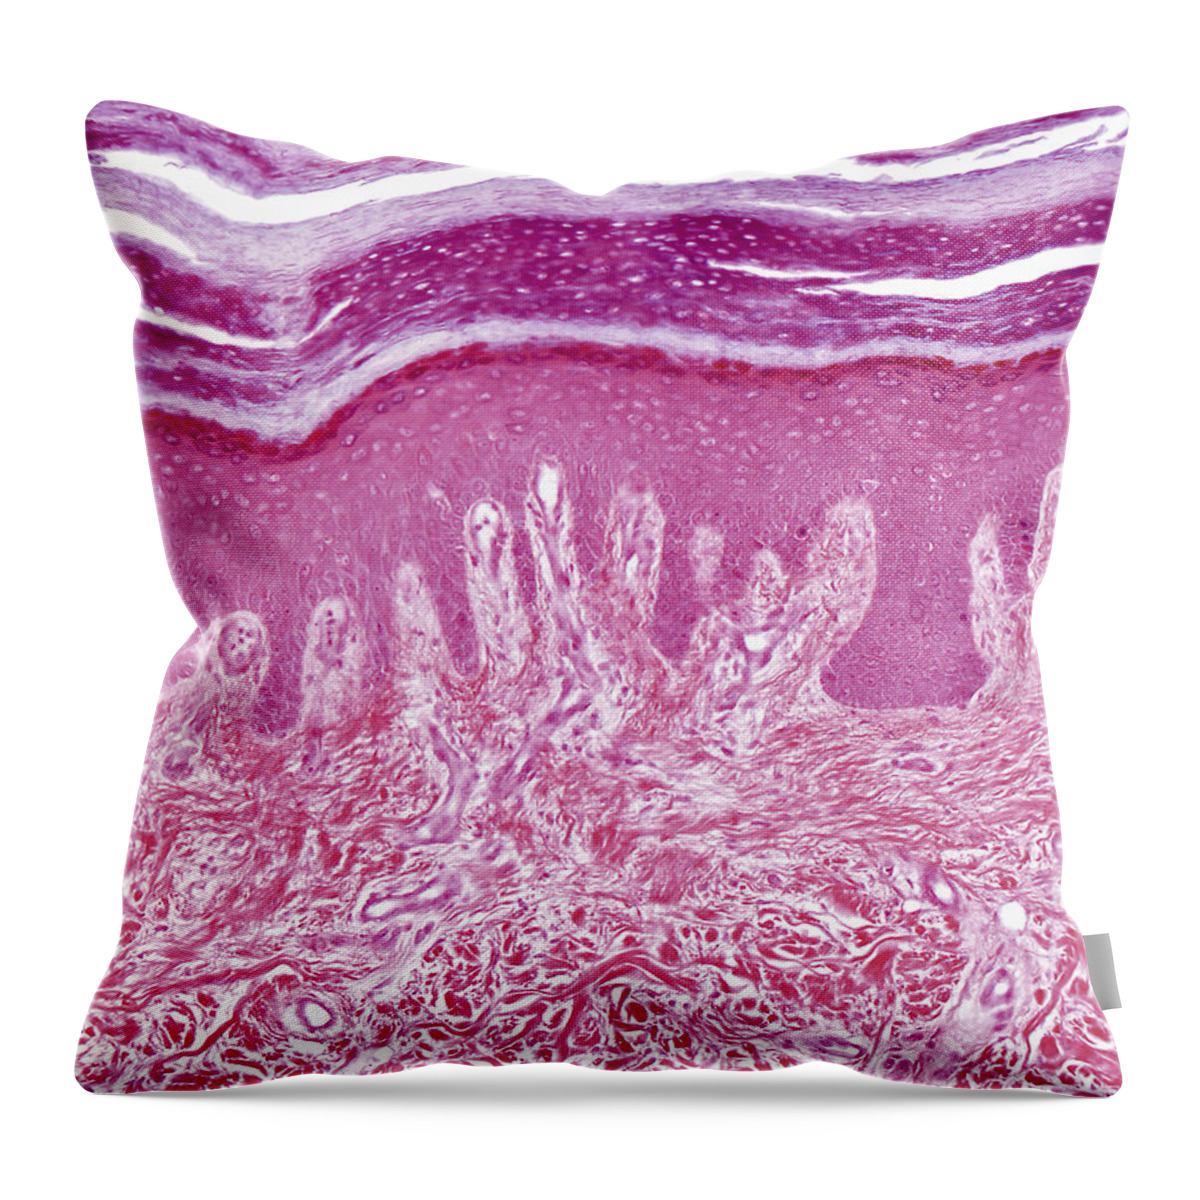 Skin Throw Pillow featuring the photograph Plantar Skin, Lm by Alvin Telser